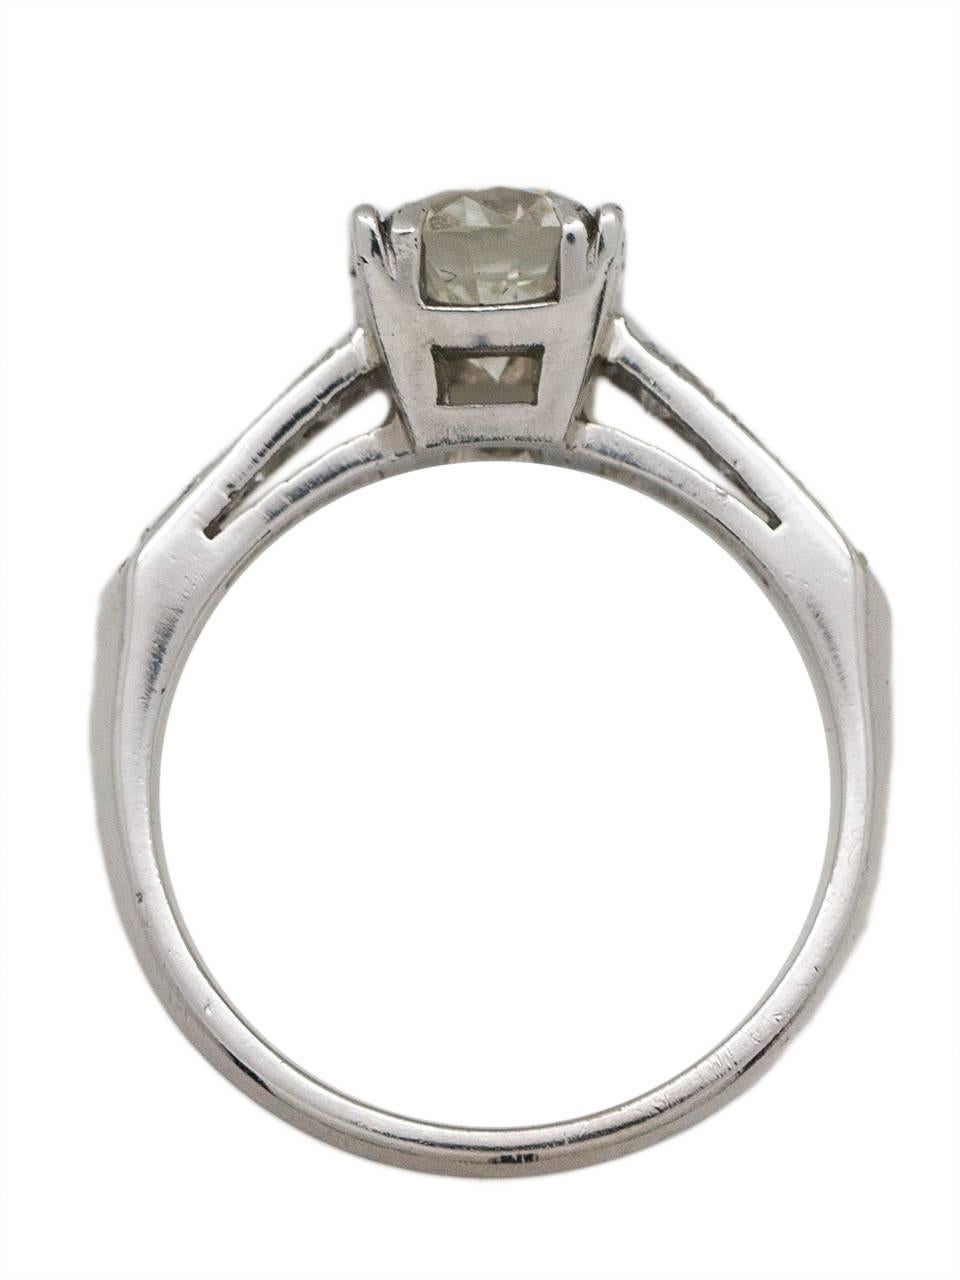 Vintage Engagement Ring Platinum 1.27ct Round Cut Diamond H-VS1, circa 1940s In Excellent Condition For Sale In West Hollywood, CA